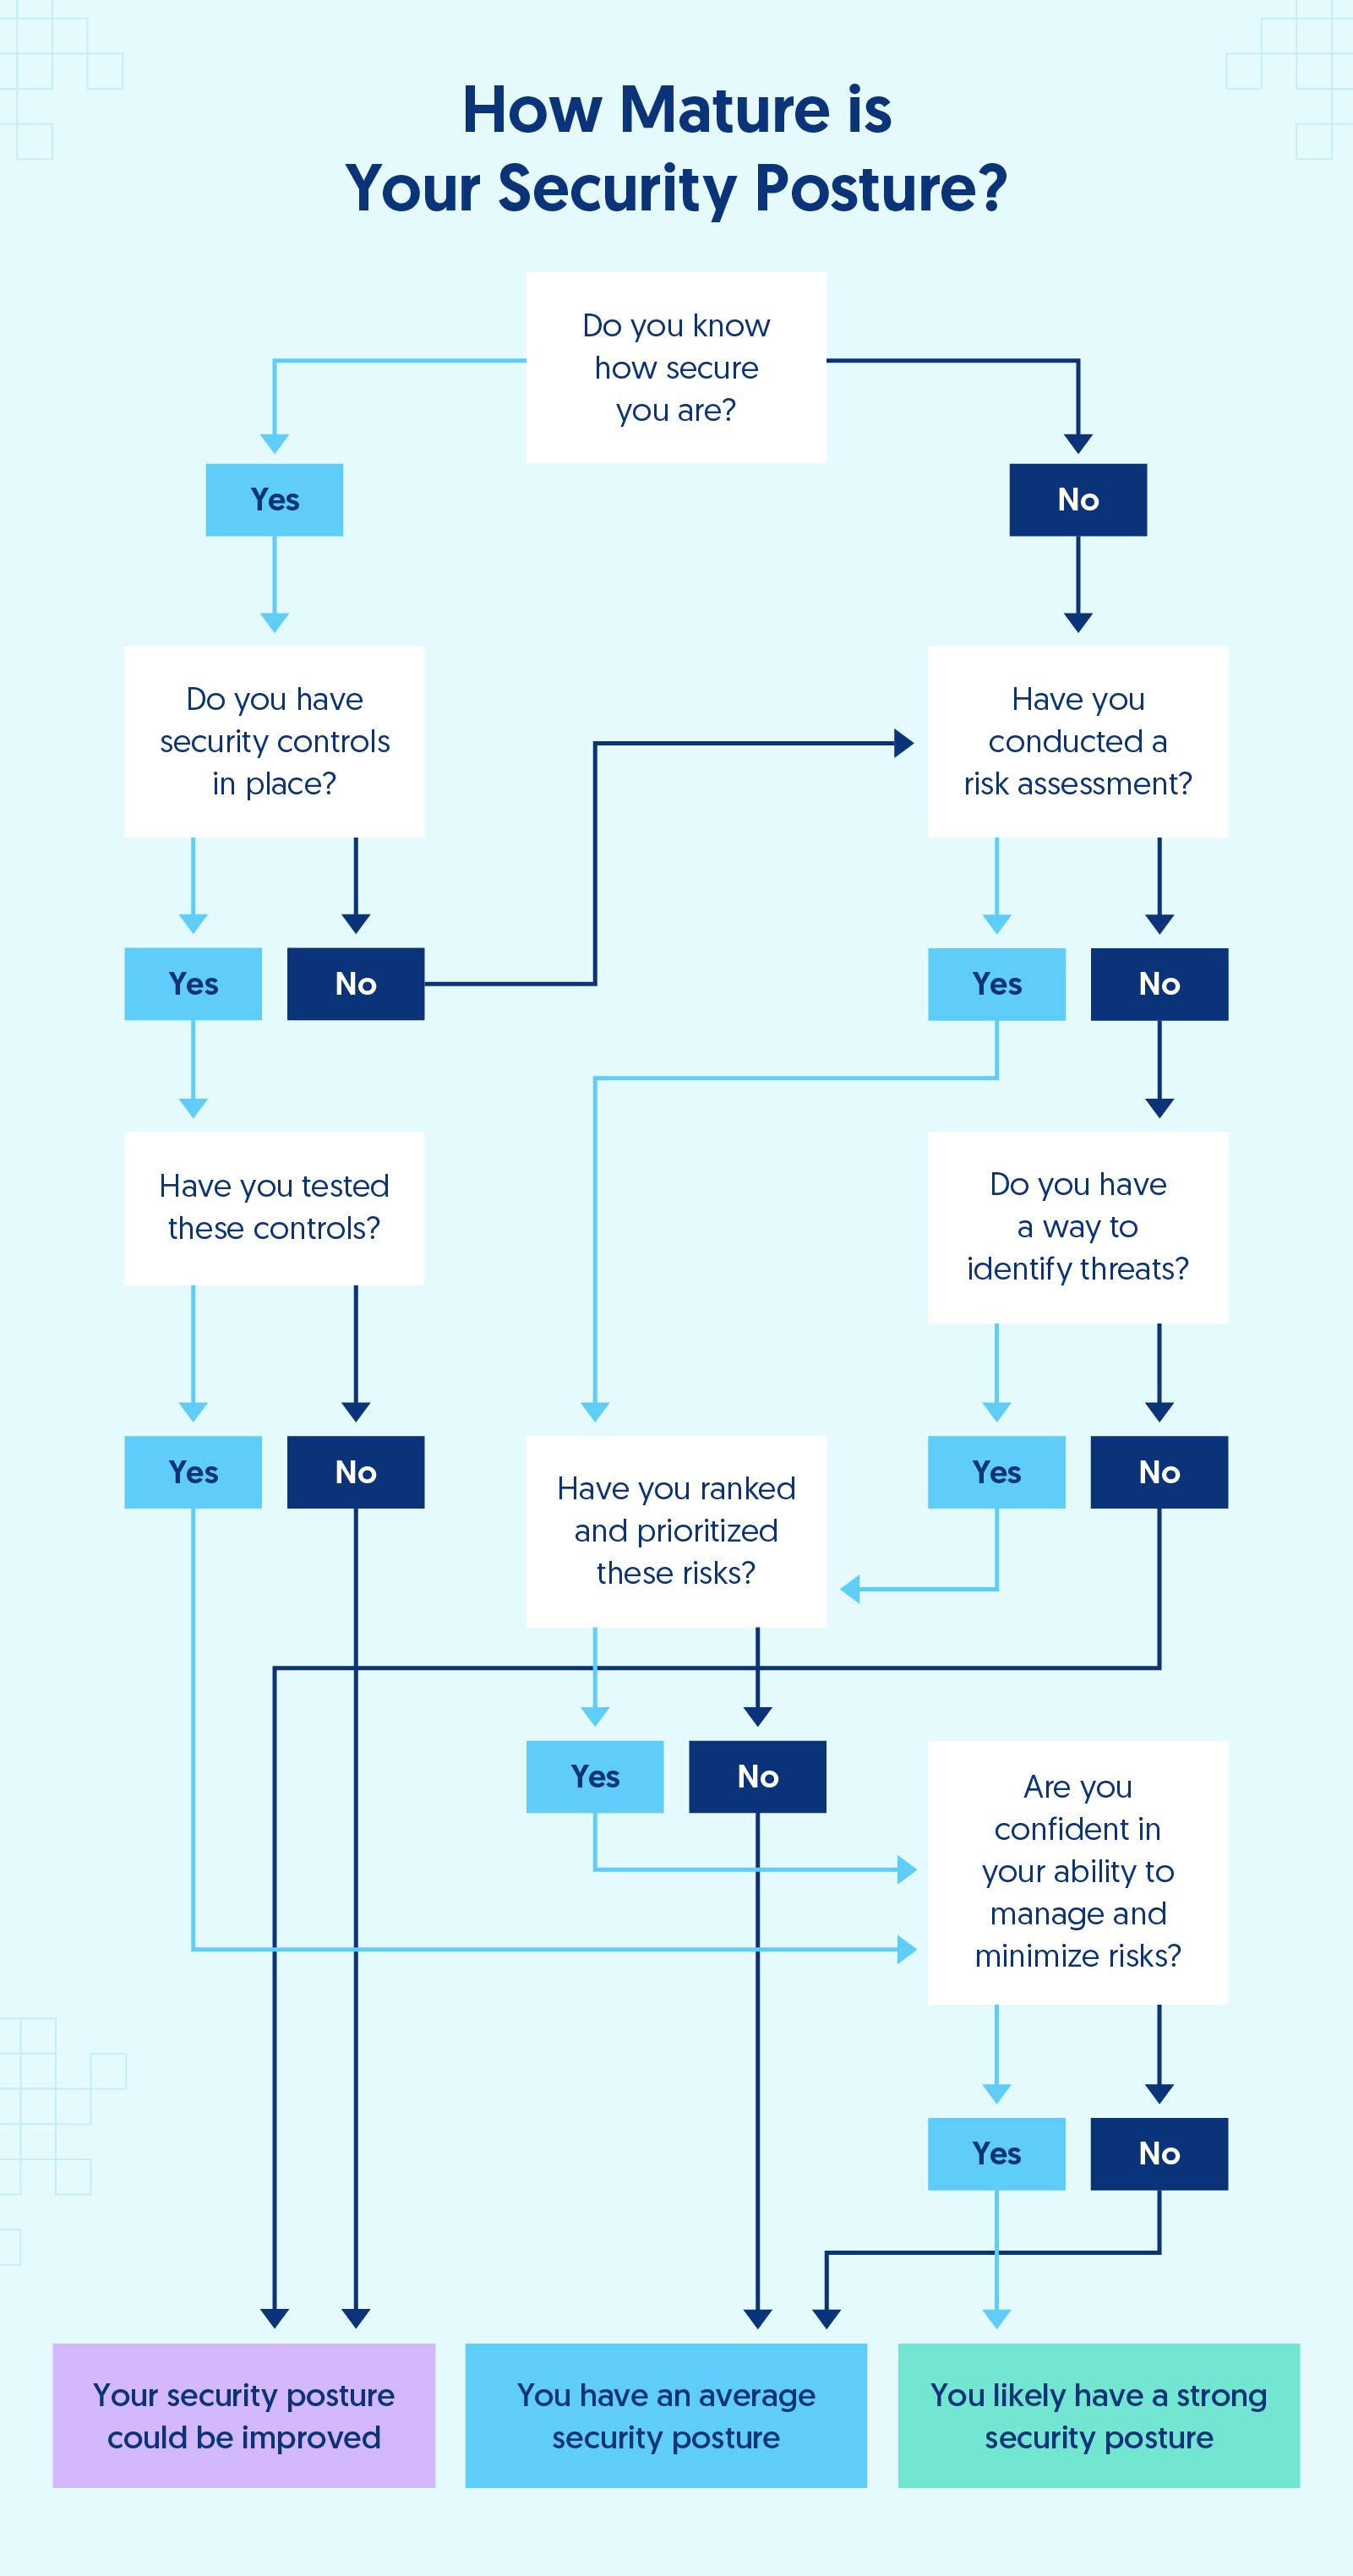 Flowchart to help you determine where your security posture stands. The flowchart asks questions that determine if you have a strong, average, or weak security posture.